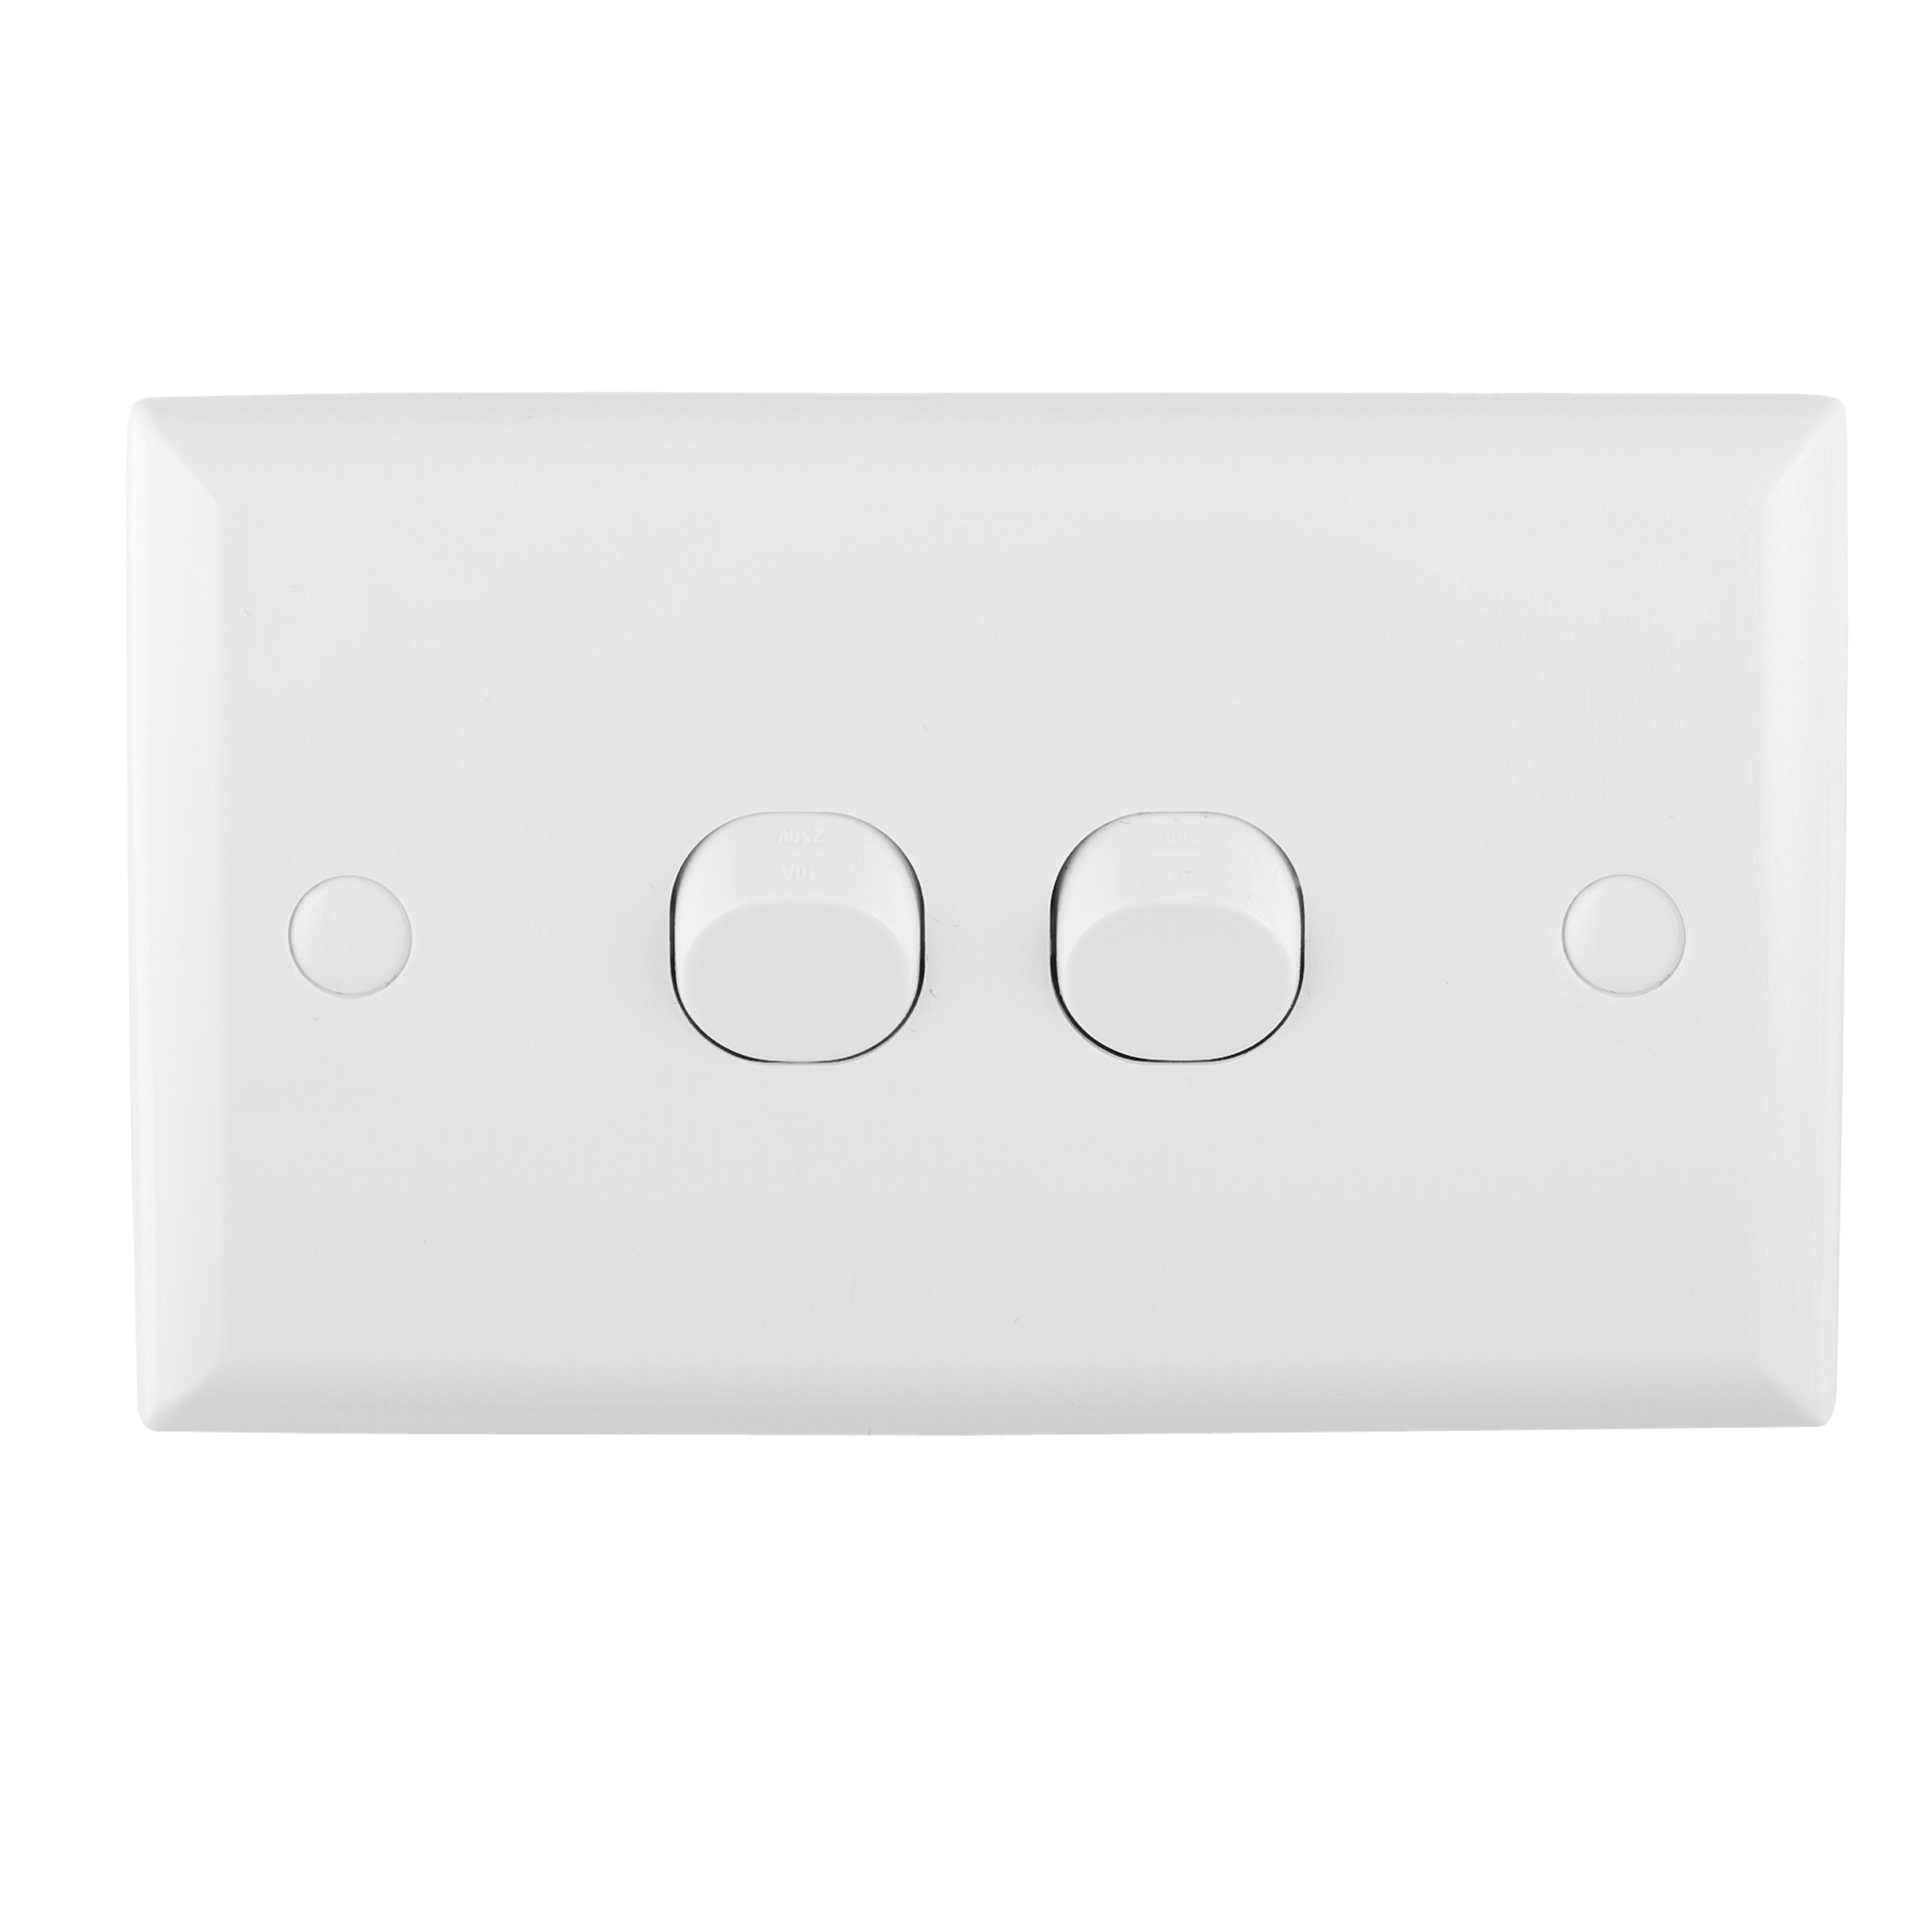  Deta solid plate double switch